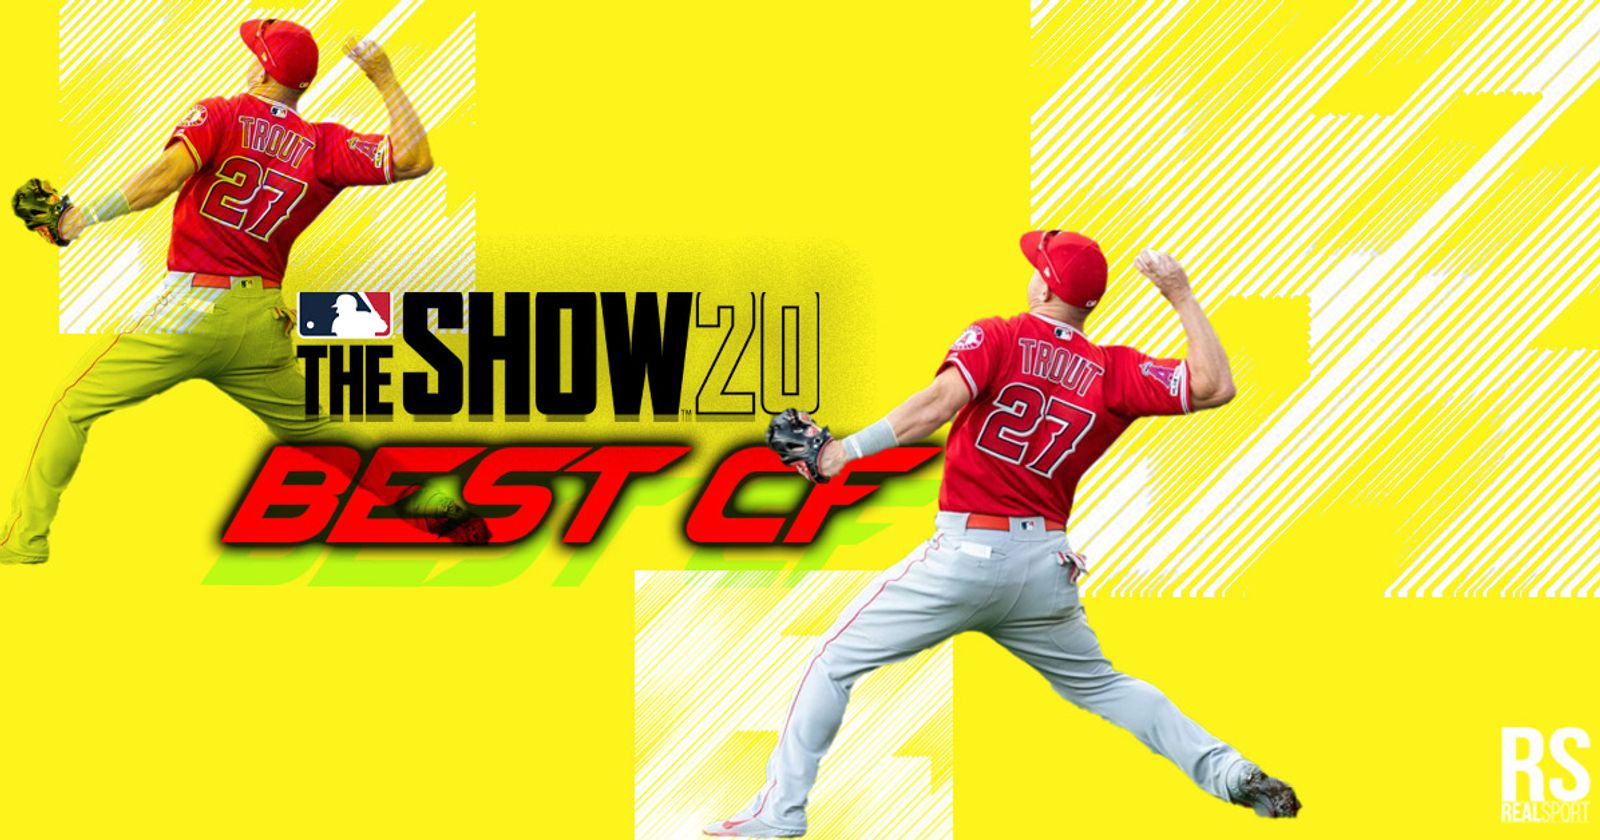 Rockies crush Giants at Coors Field in MLB The Show 20 – The